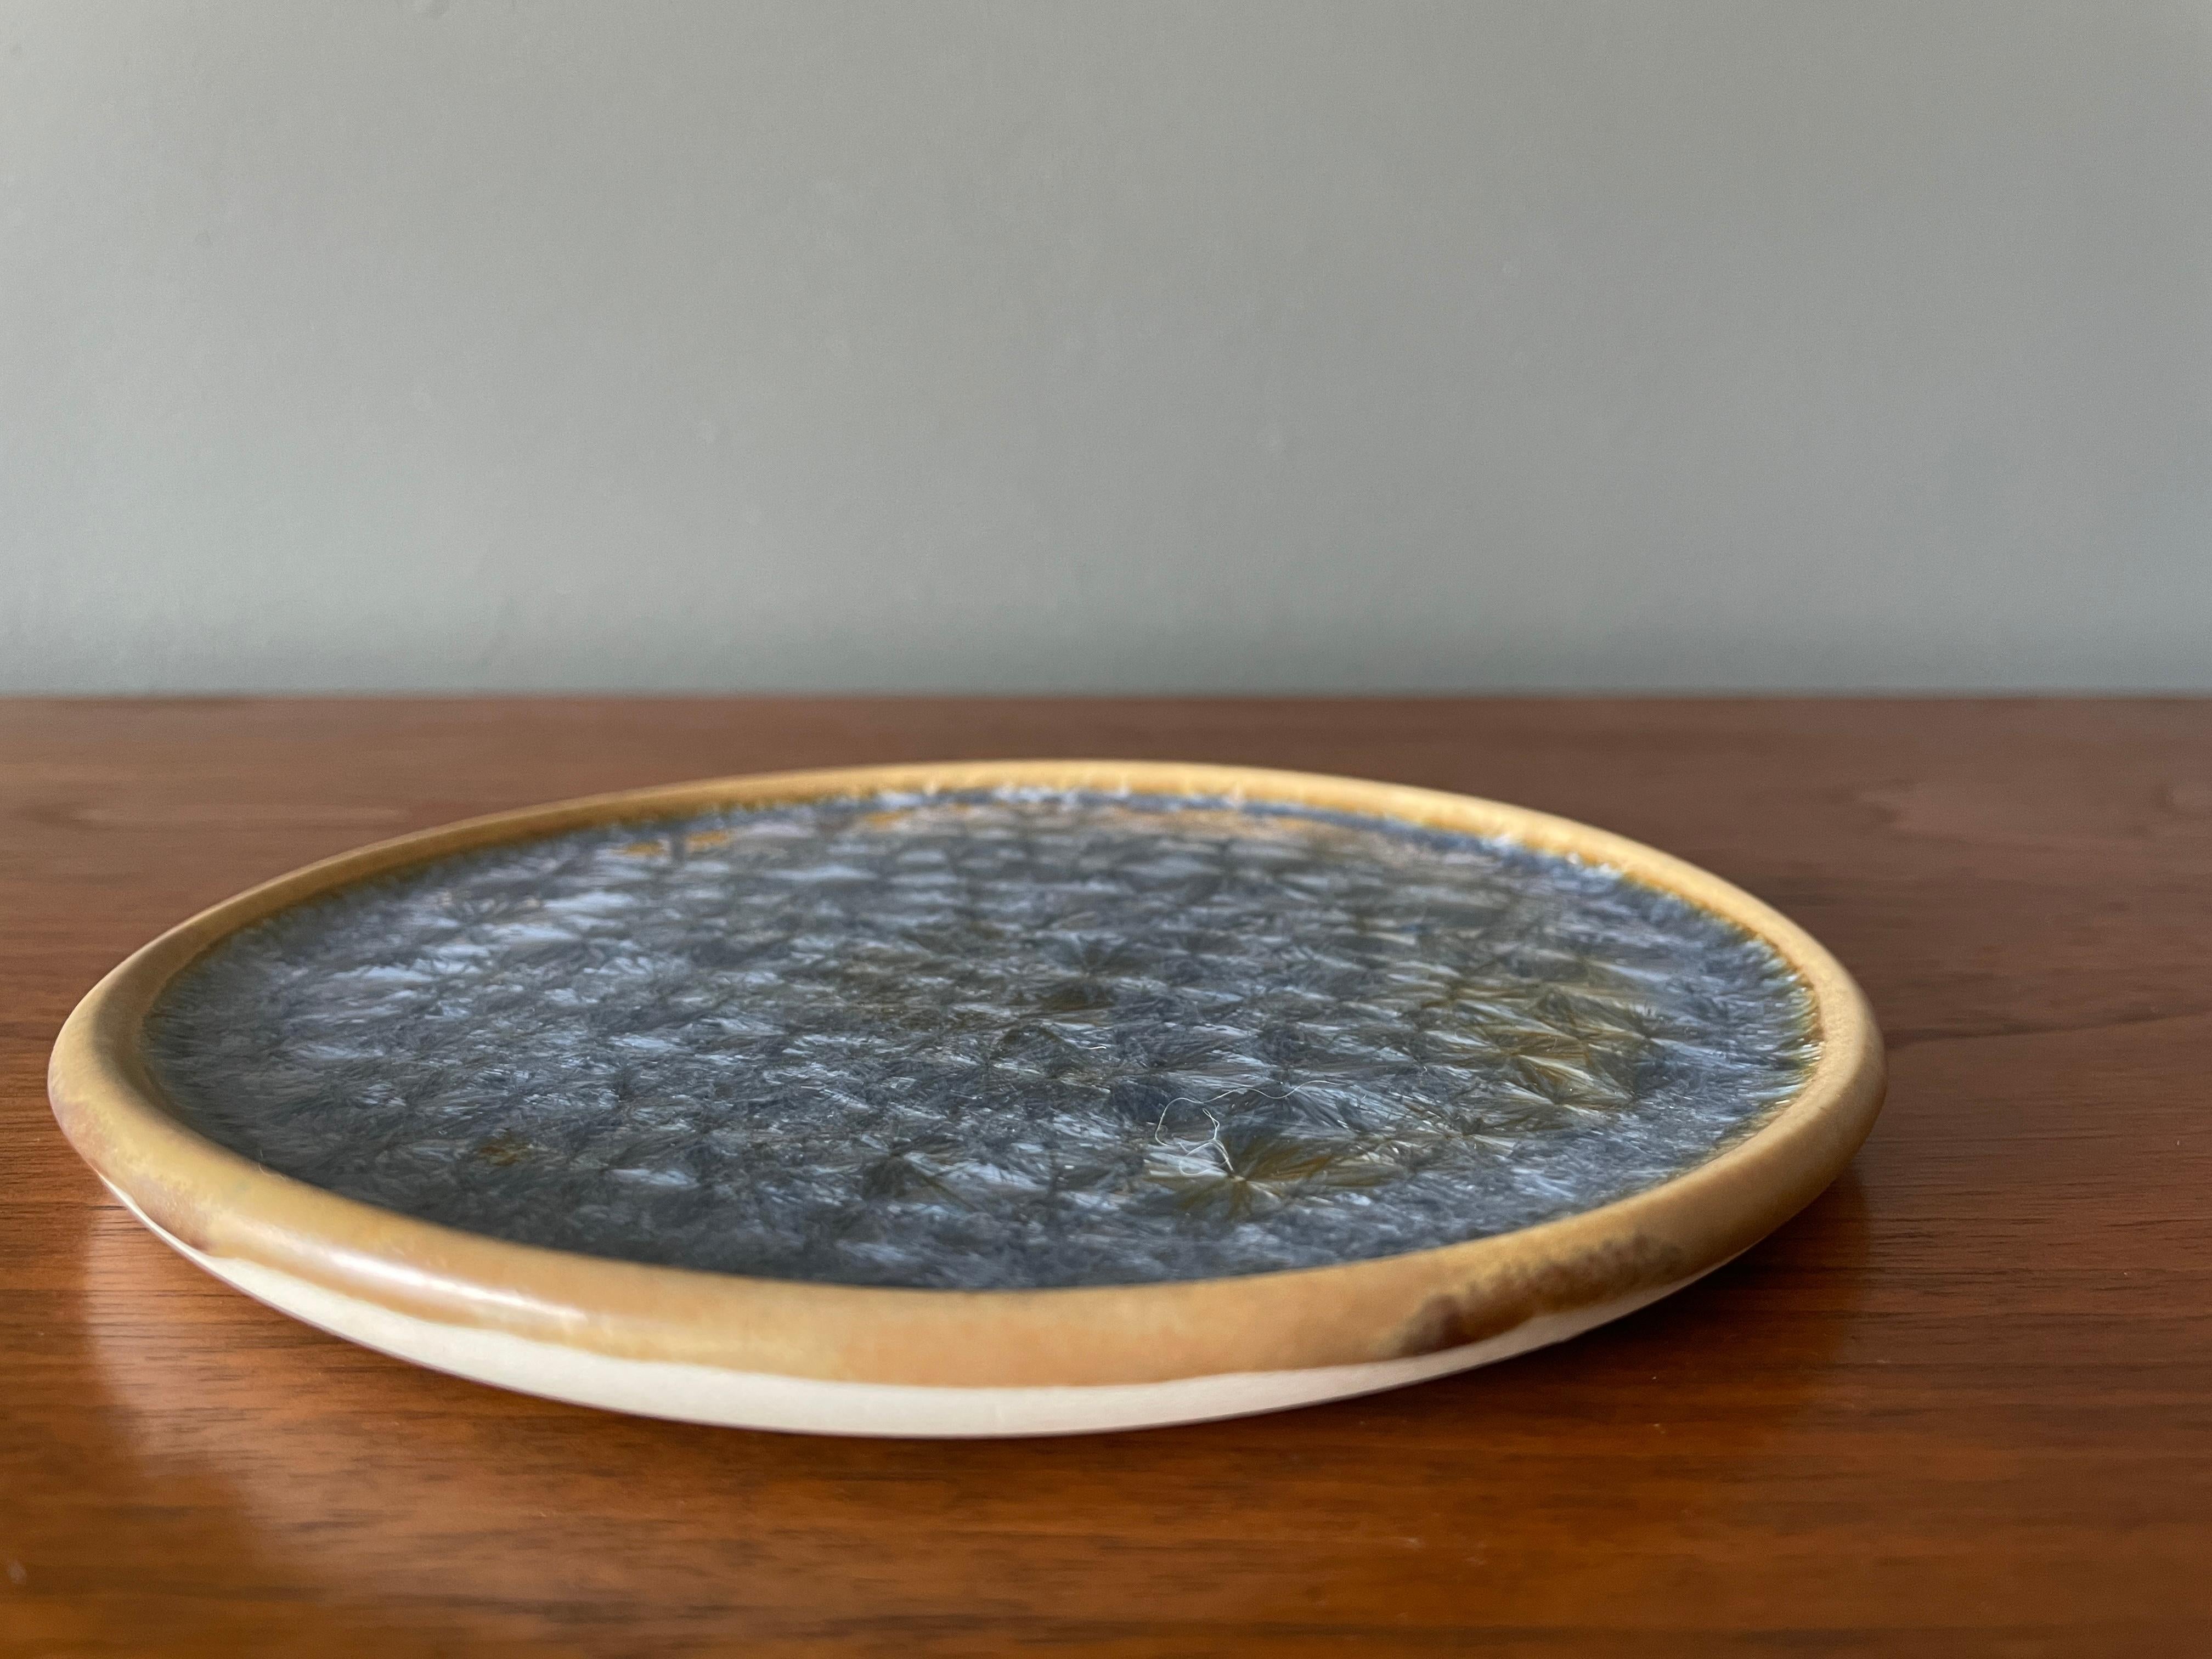 Vintage ceramic and glass decorative plate. Beautiful crackled pattern and matte glazing.